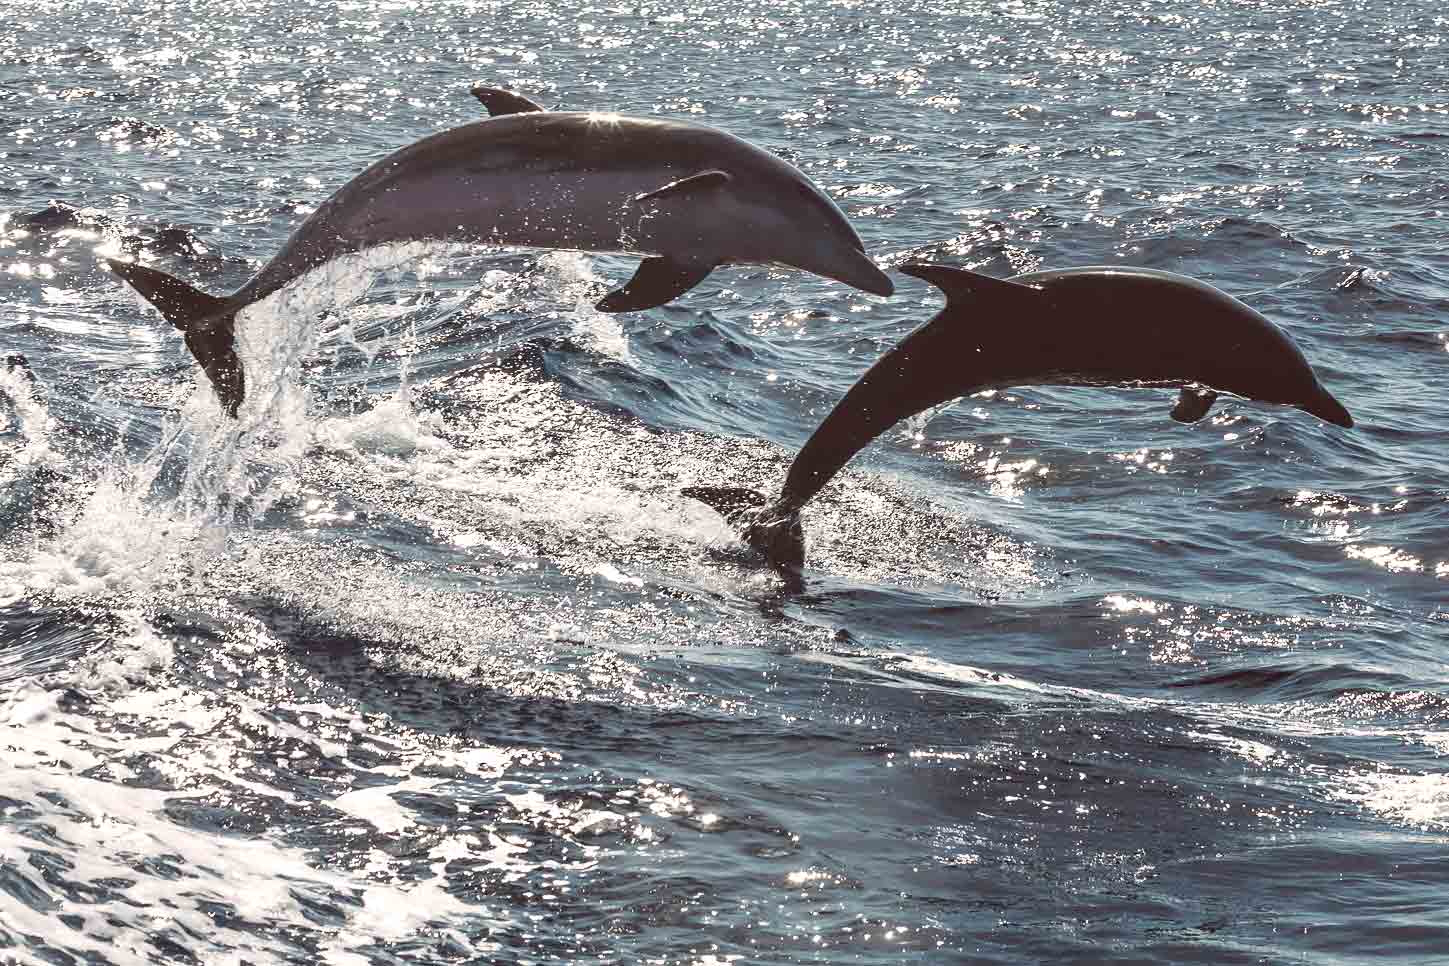 Dolphins or whales, the Canary Islands are surrounded by 26 species